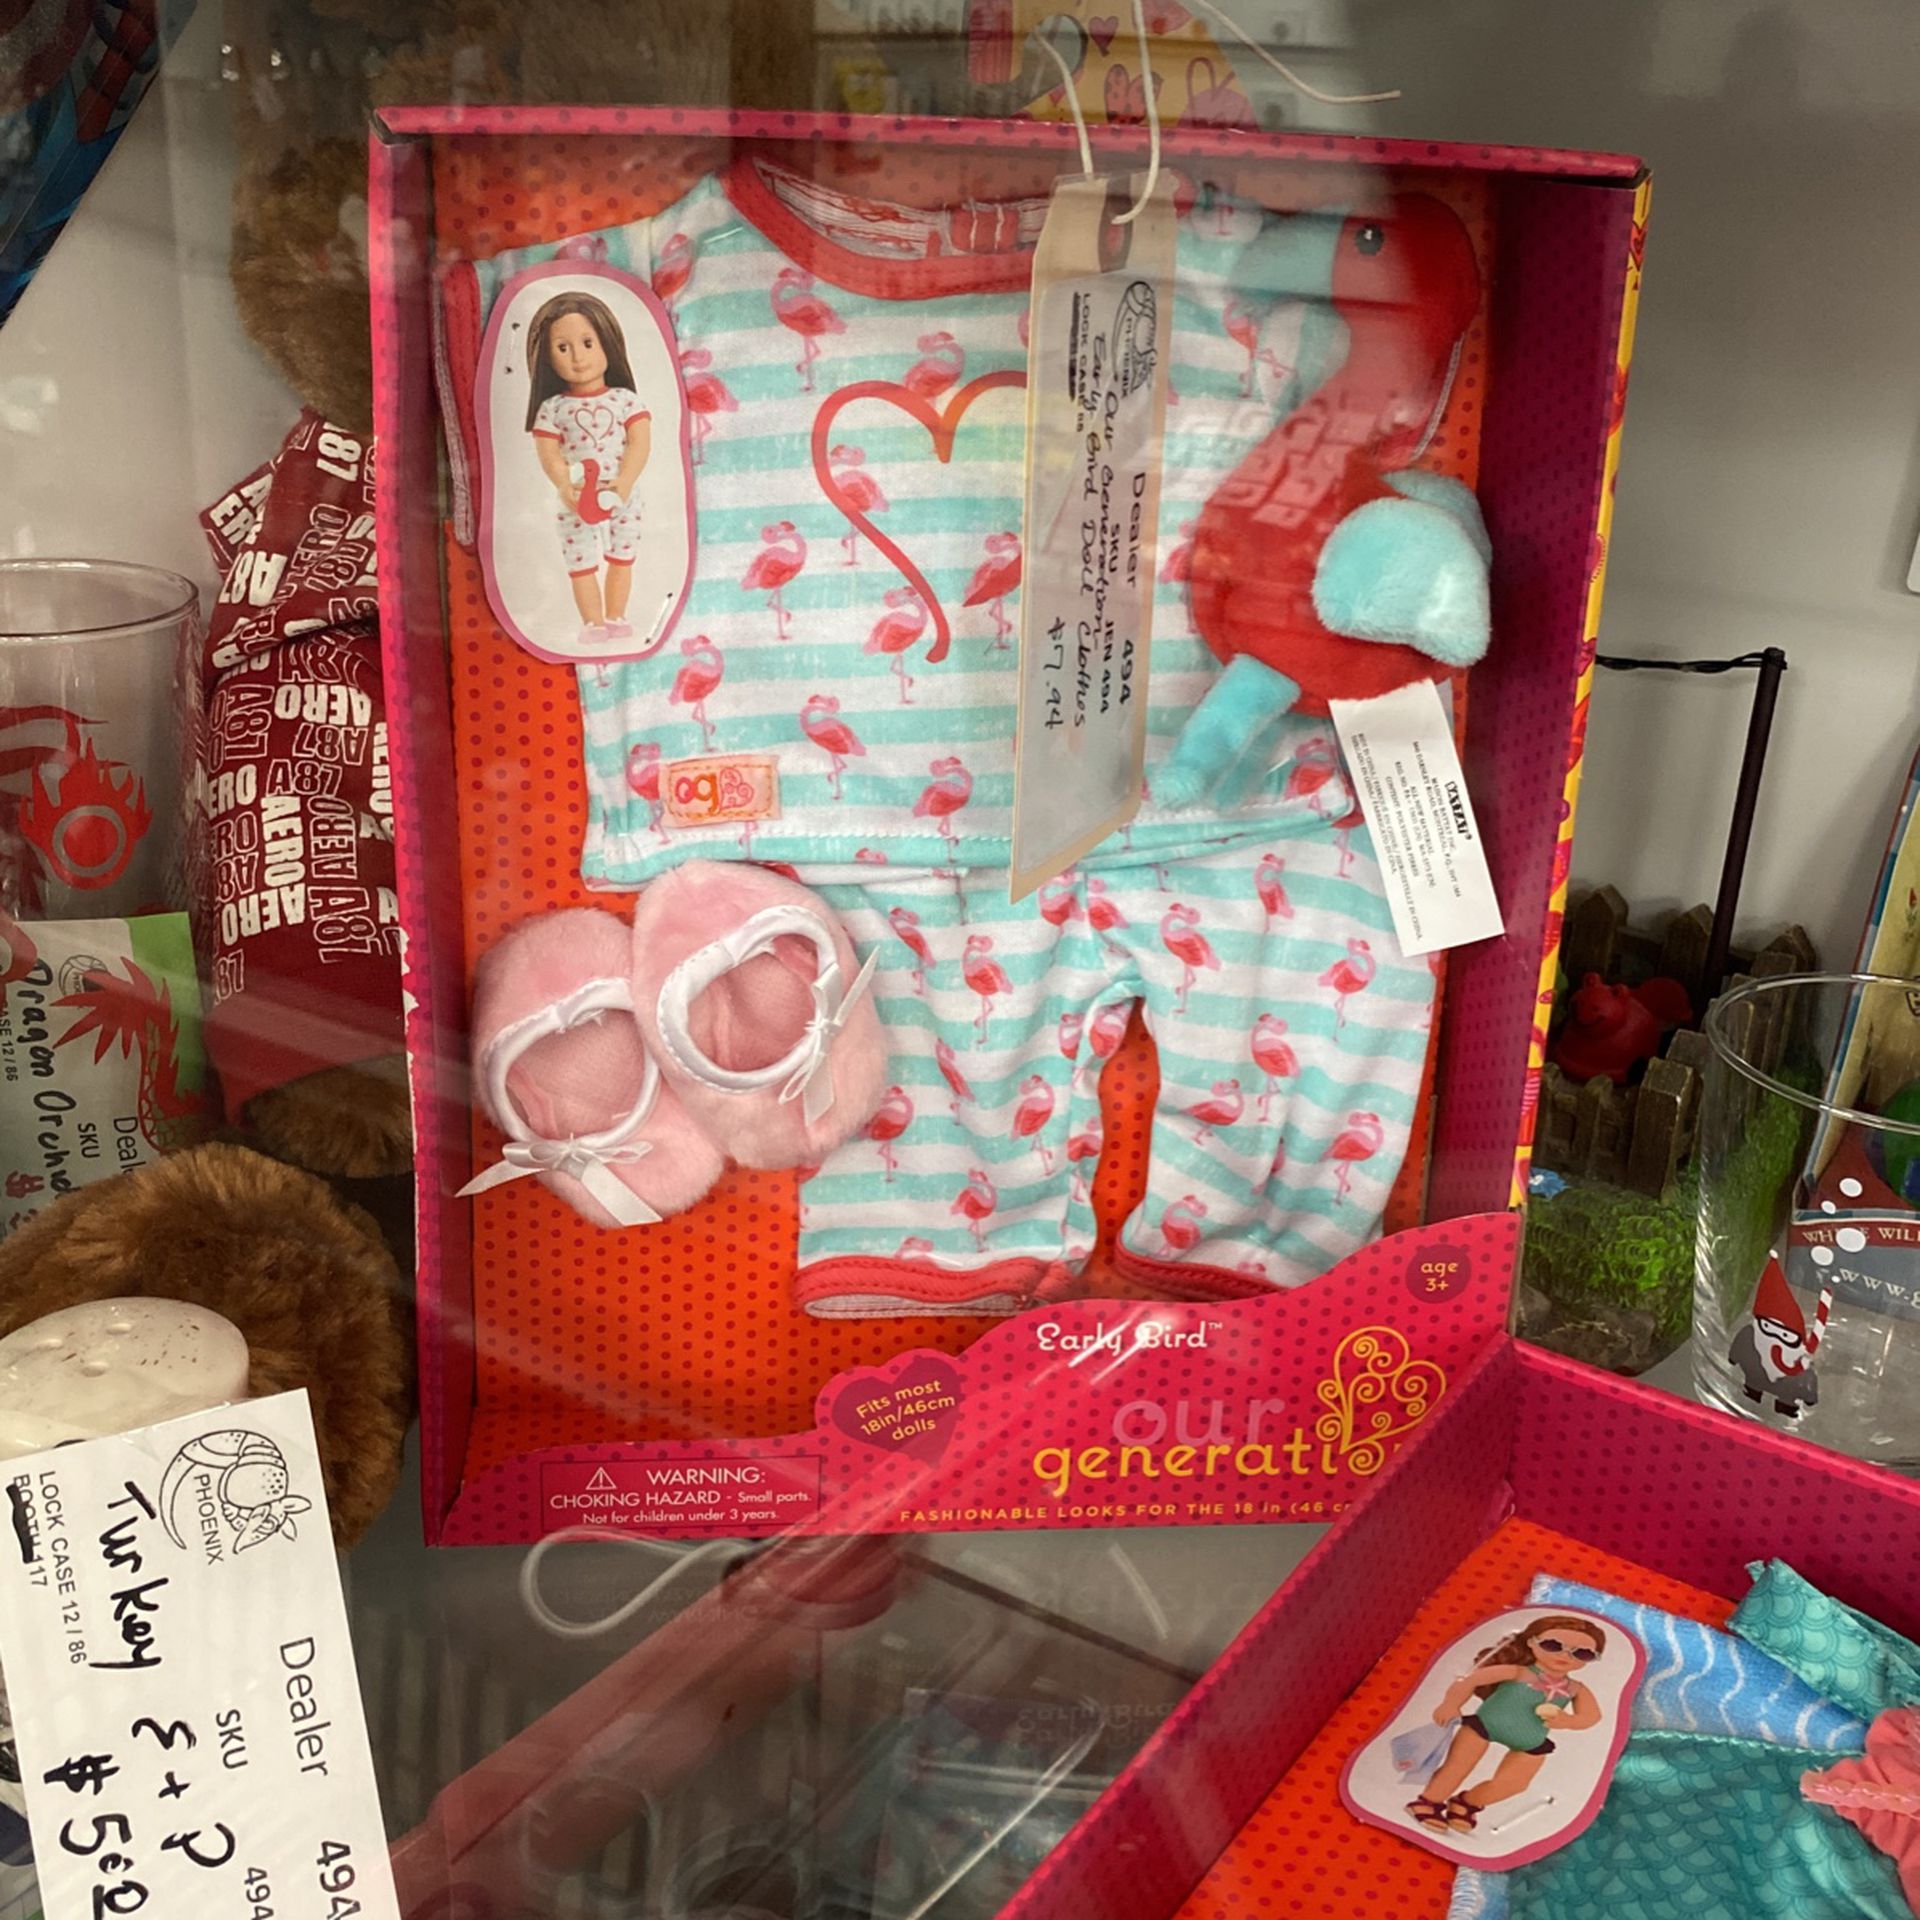 Early Bird Clothes Fit 18” Doll -$7.94